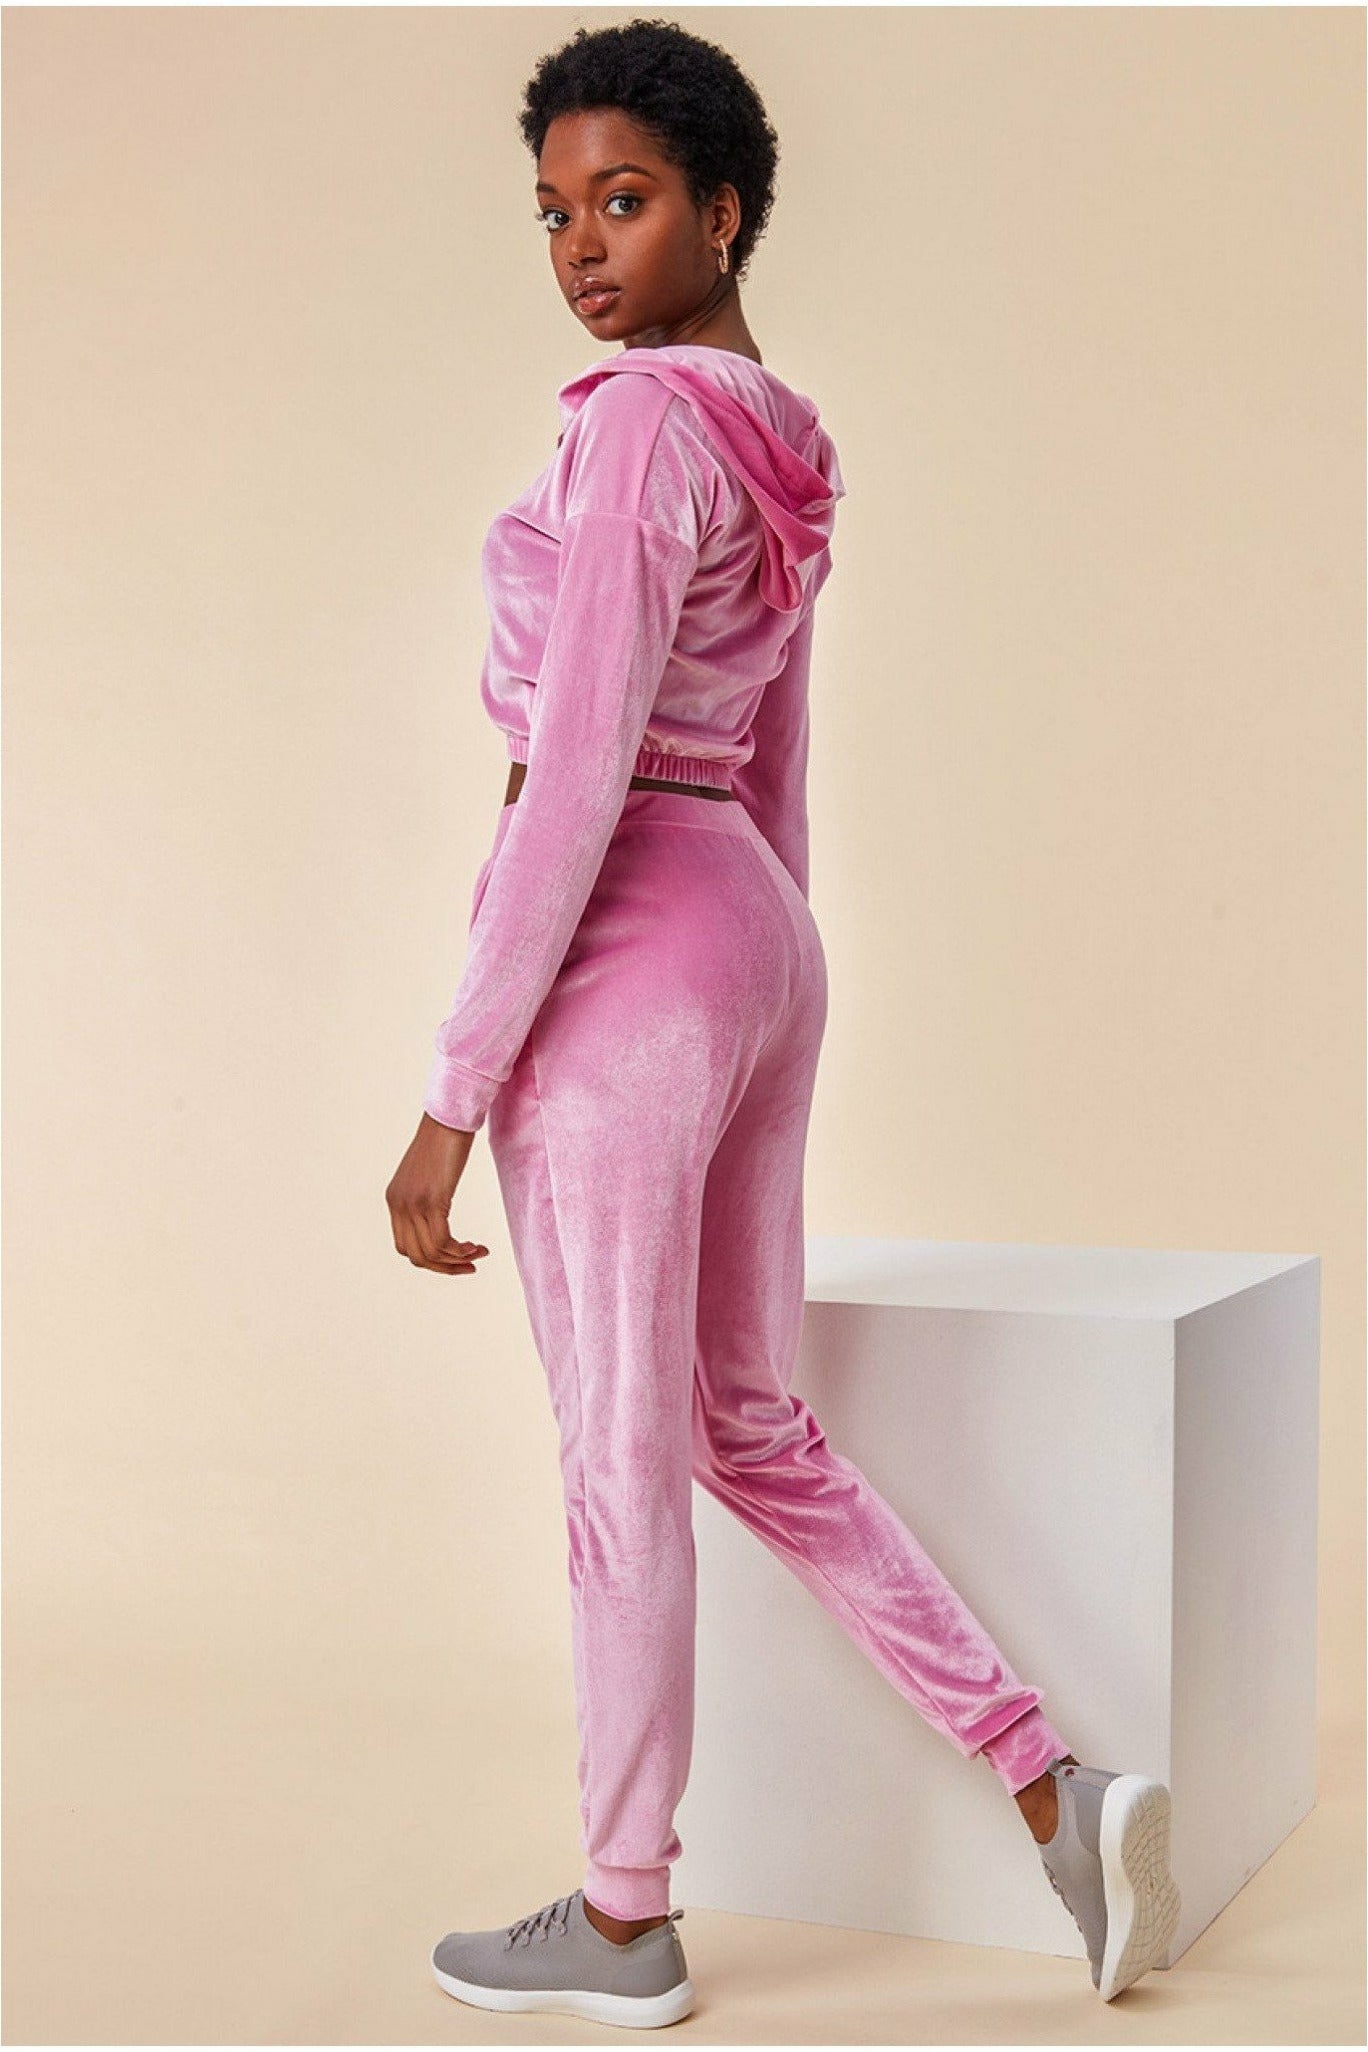 Cuffed Ankle Velour Tracksuit - Pink TS10